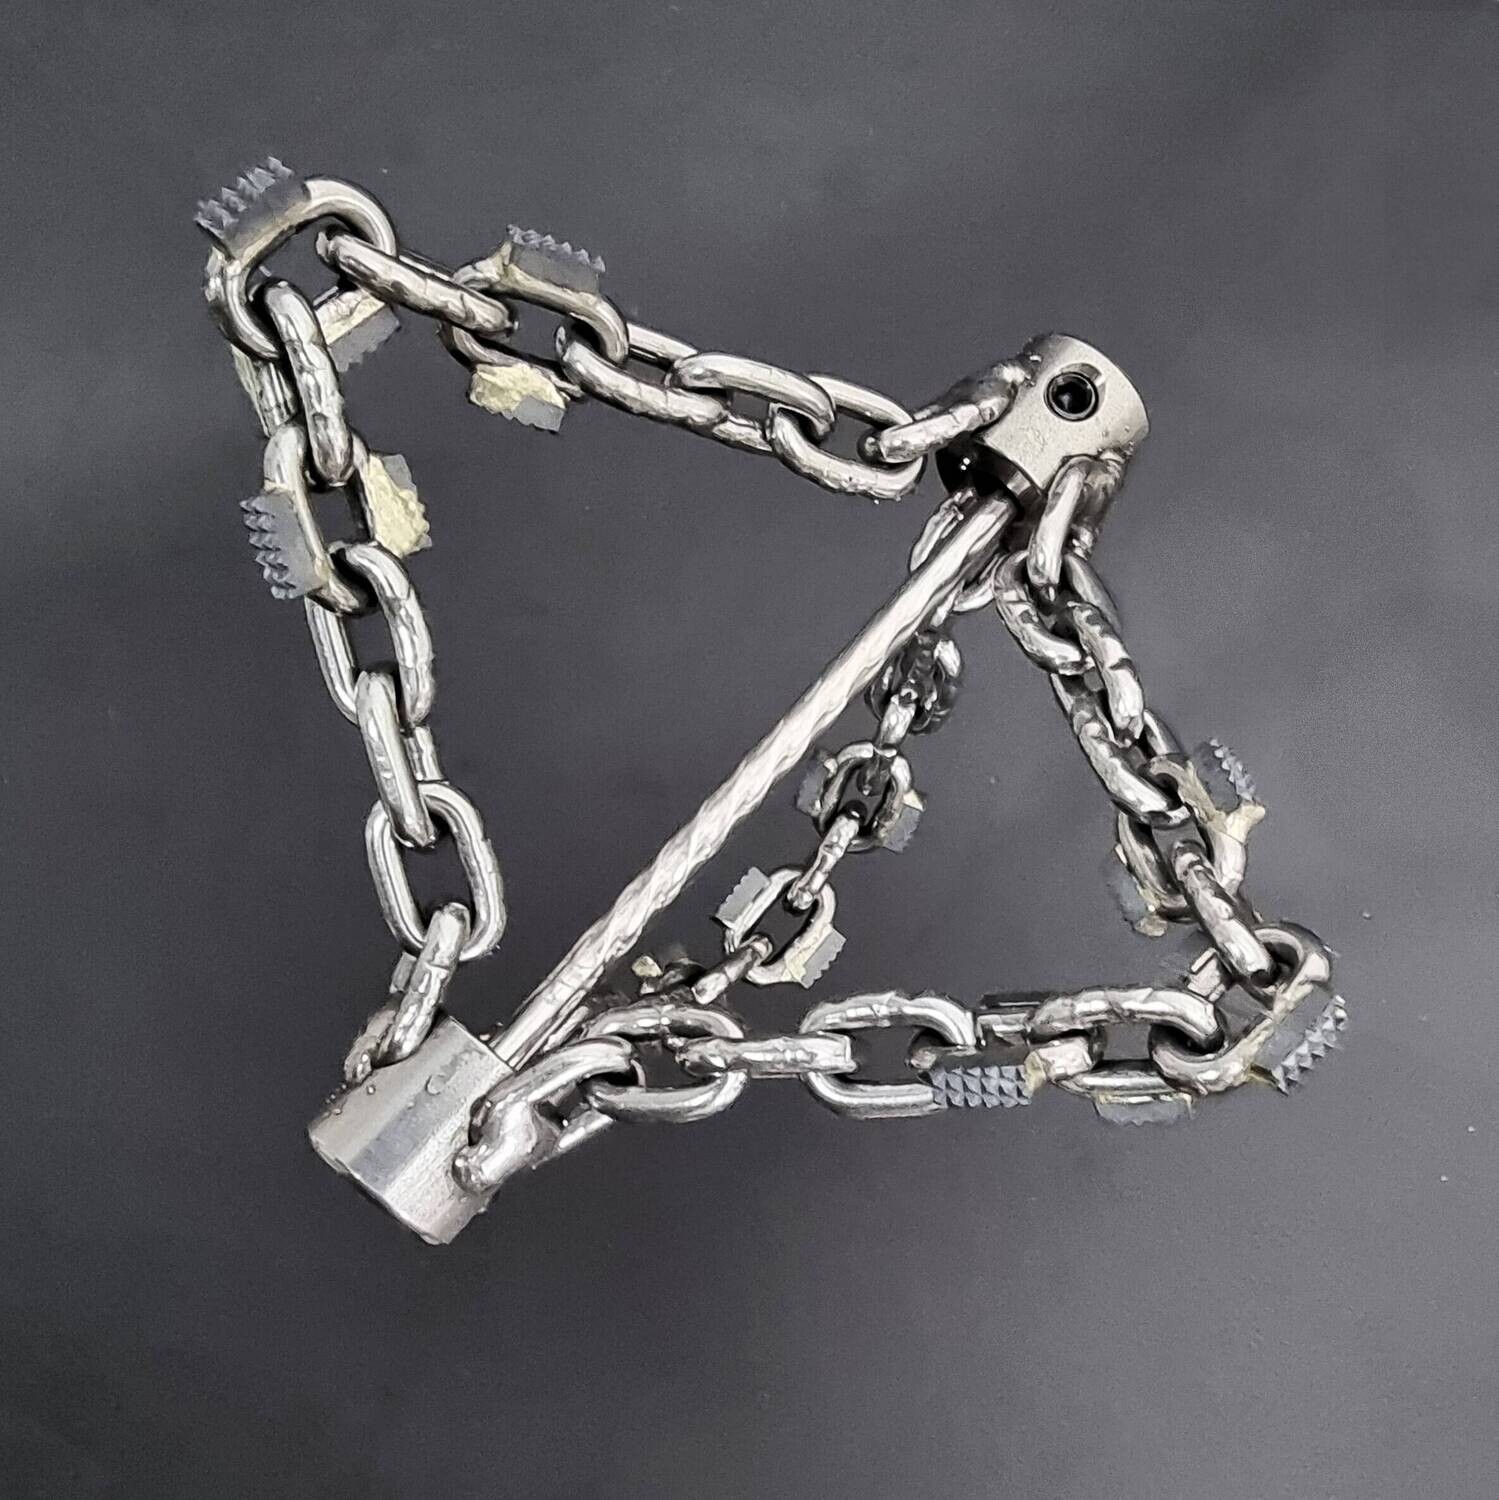 Croco Chain (Cast Iron & Clay Pipes) is a tool for cleaning of cast iron and vitrified clay pipes and is used with a toilet snake or miller machine